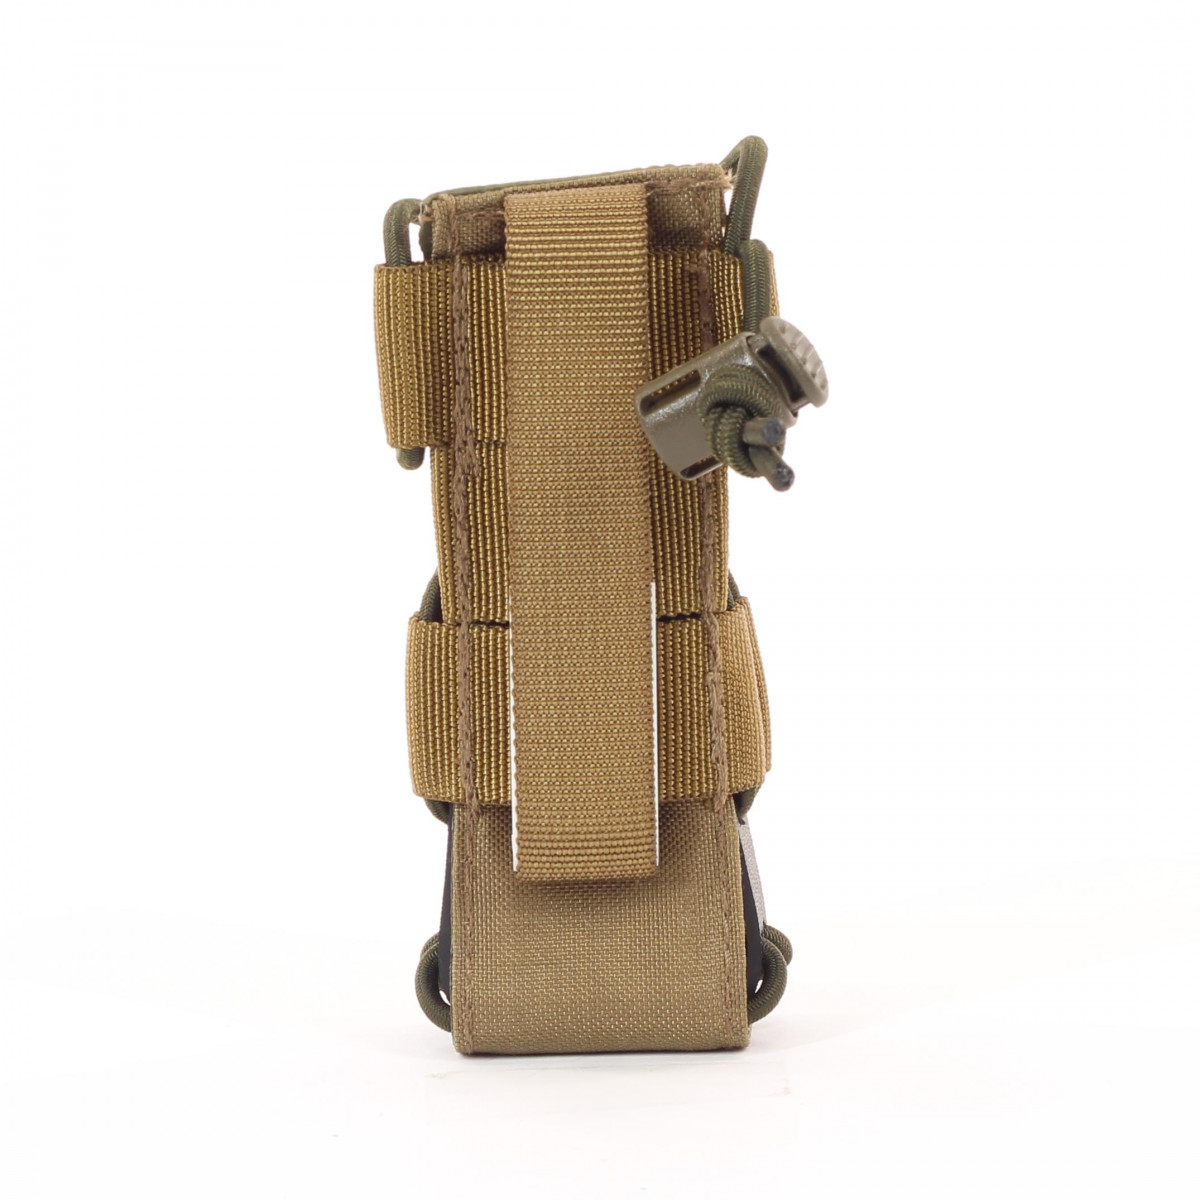 Universal lamp holster and magazine pouch MOLLE system in Coyote